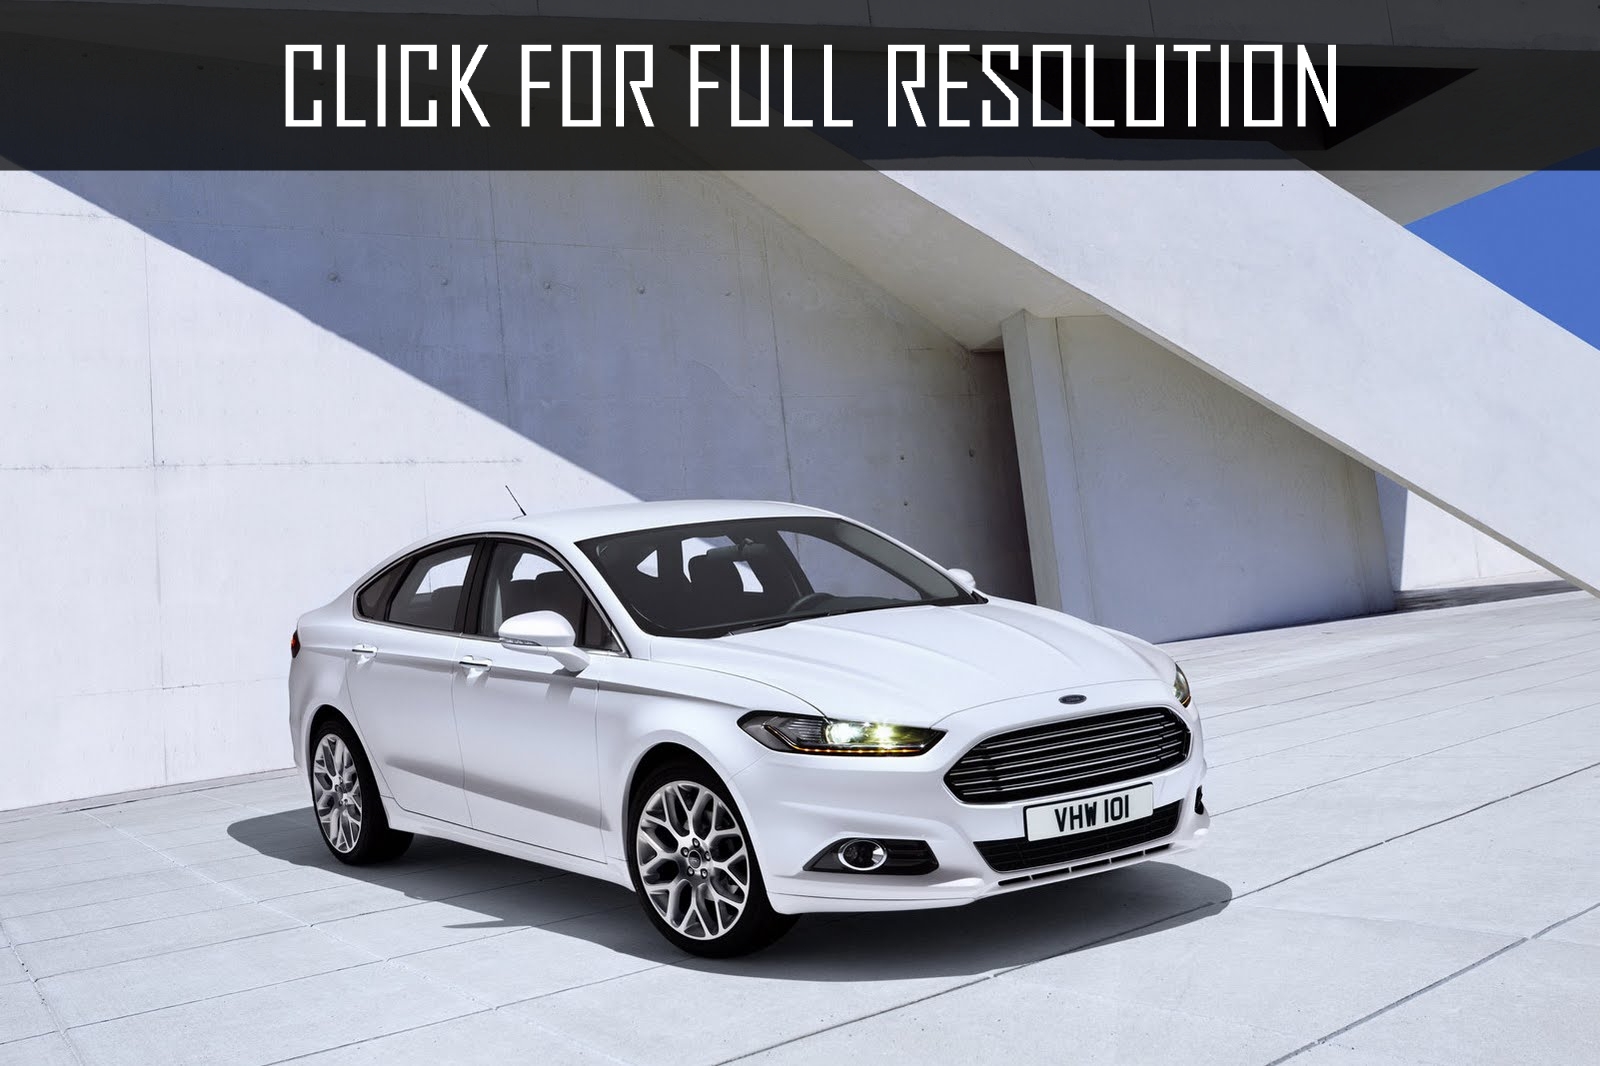 2014 Ford Mondeo news, reviews, msrp, ratings with amazing